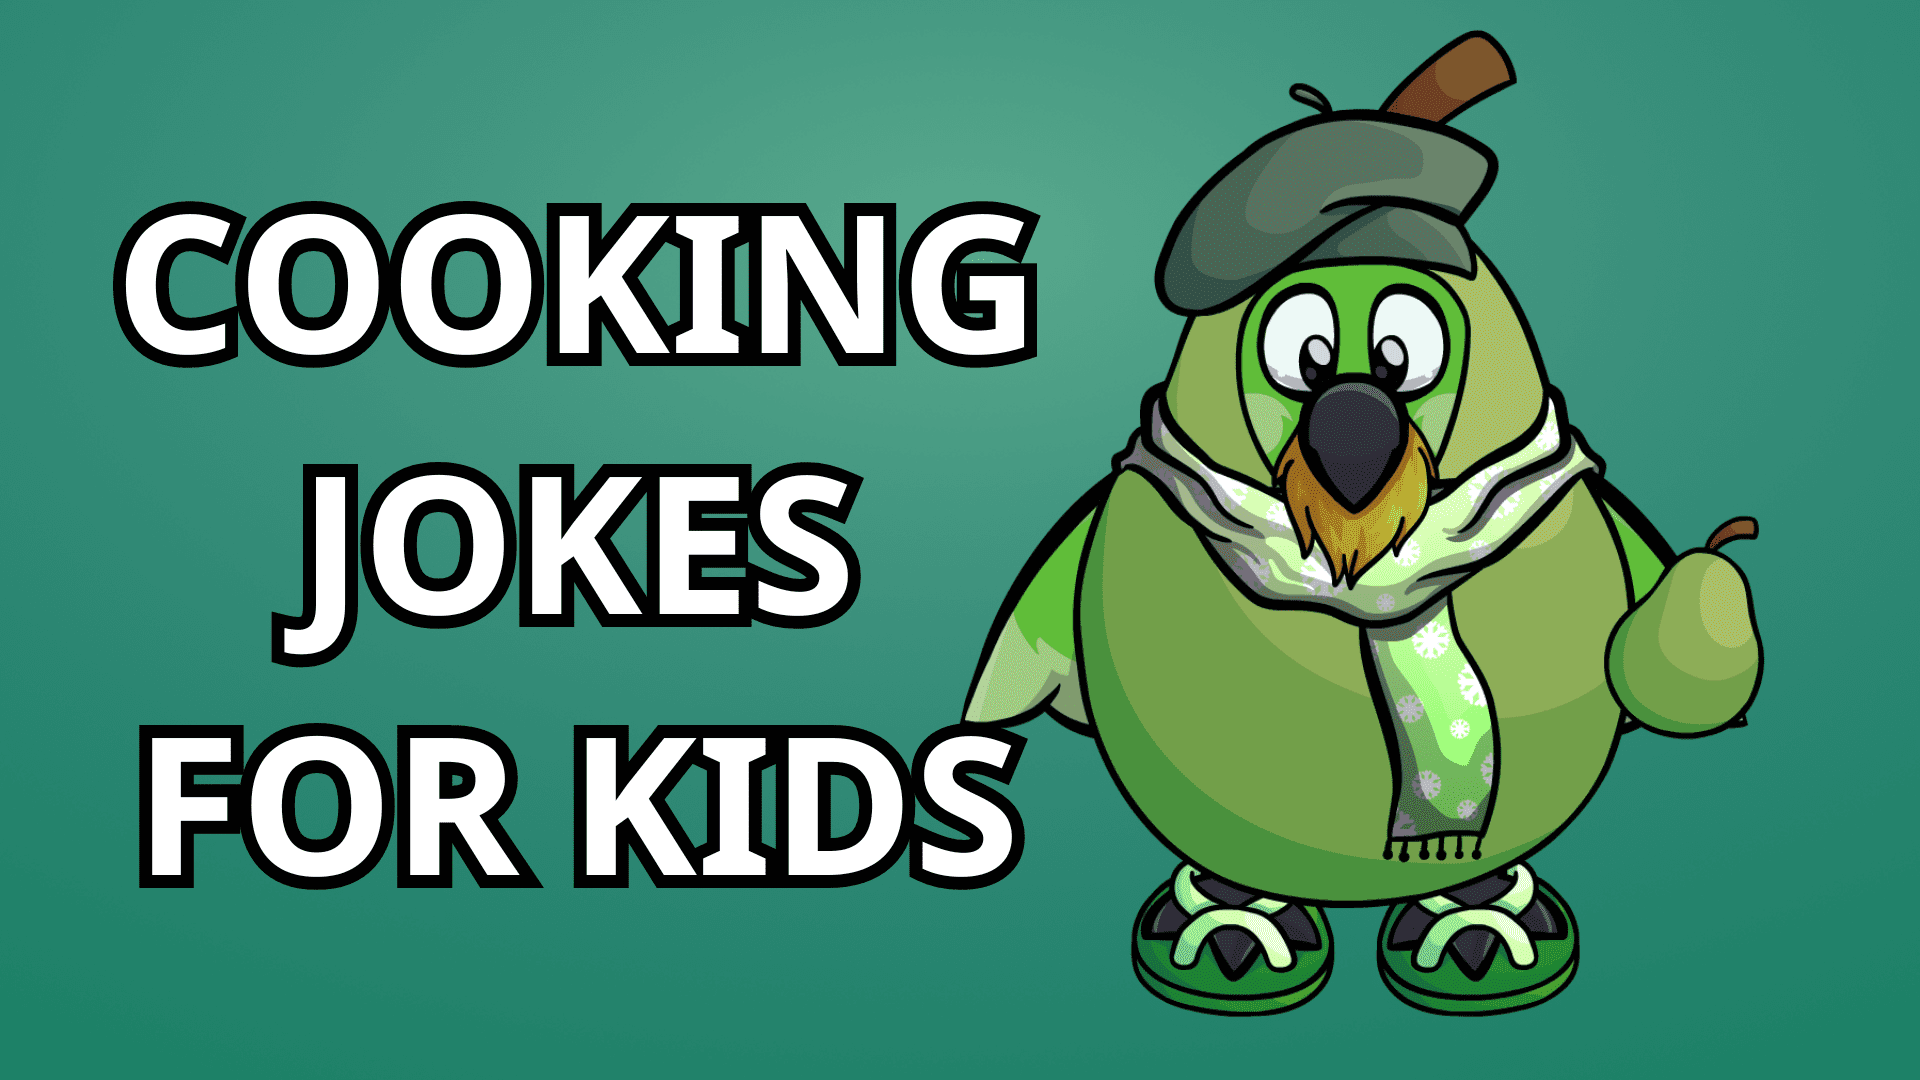 A green parrot wearing a full-body pear costume holding a pear and wearing a green beret, yellow beard, and green scarf. Against a dark green background, the text "Cooking Jokes for Kids."